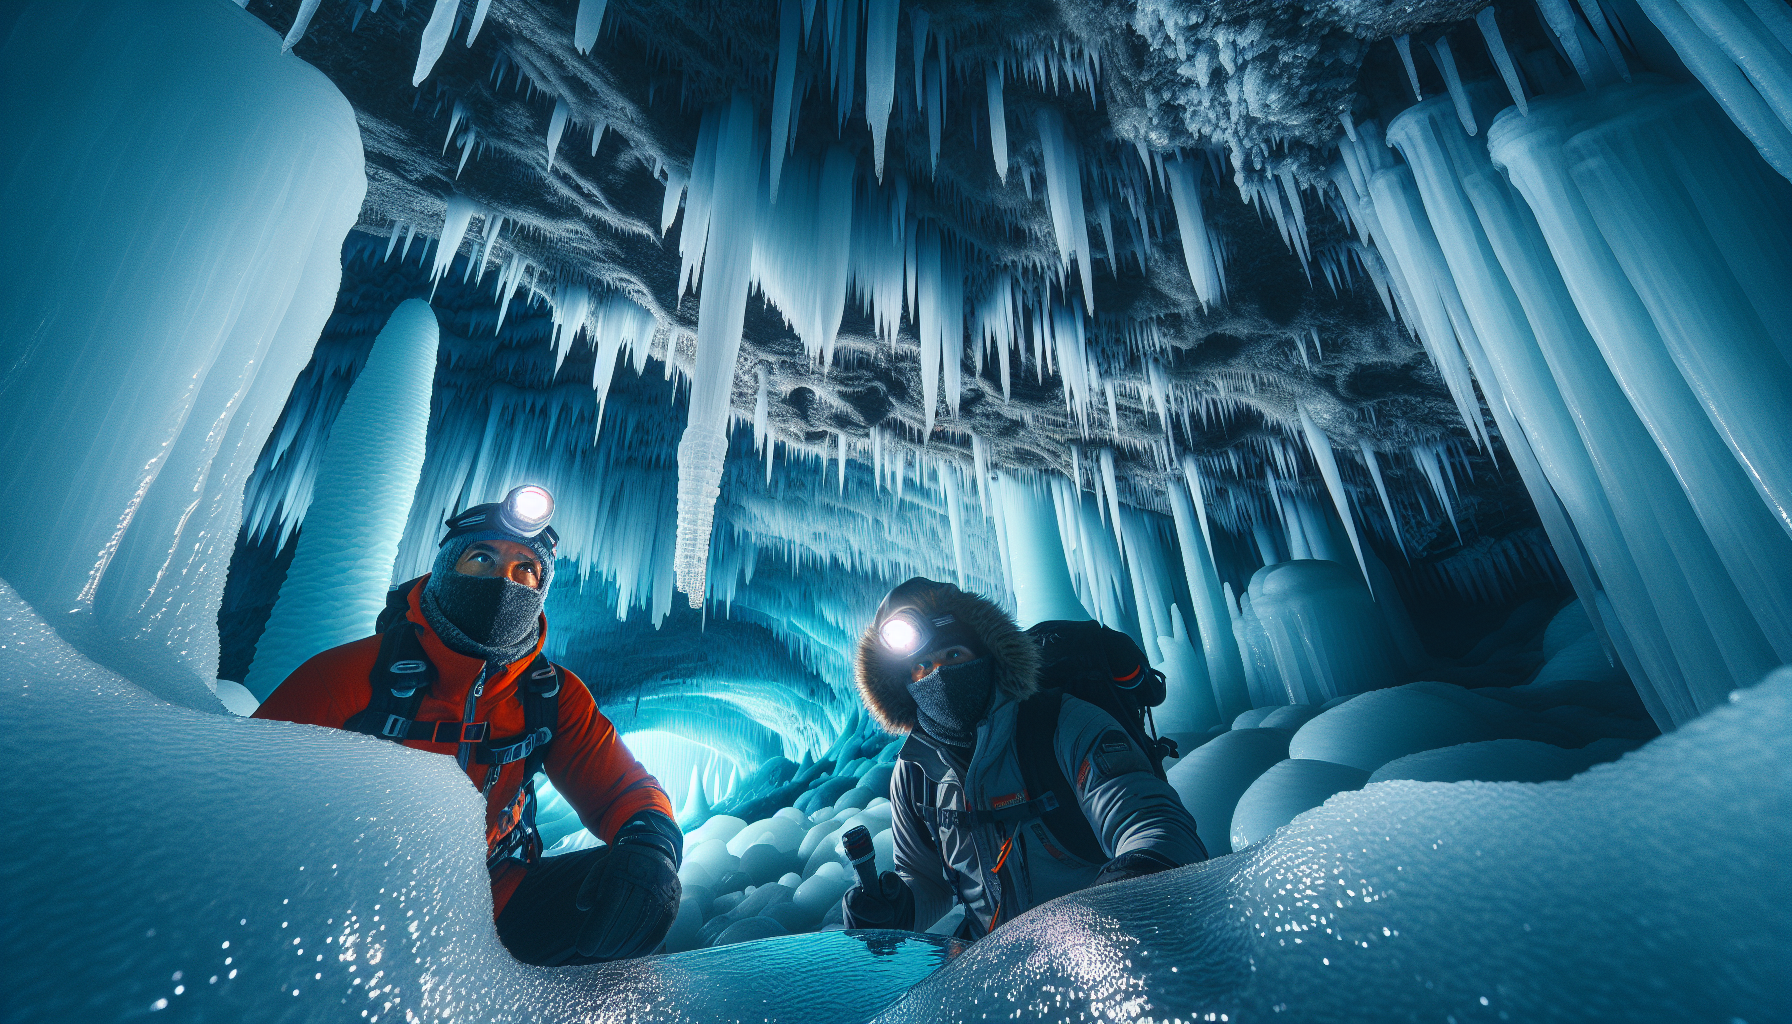 explore the best places to visit in europe and discover the enchanting ice caves: an adventure you won't forget!